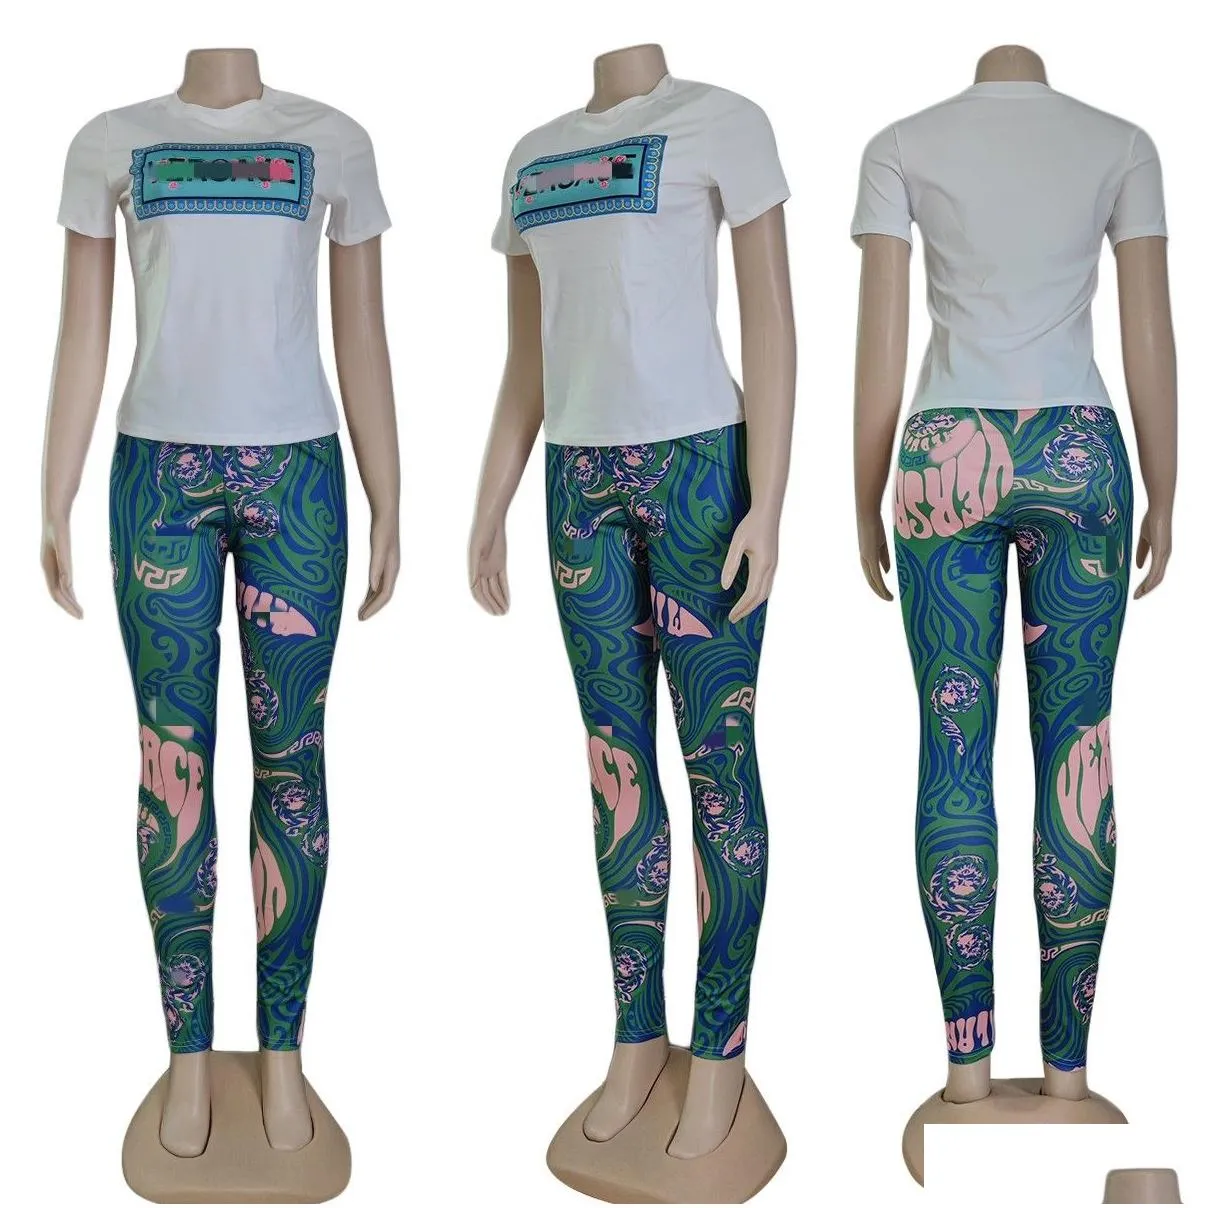 Womens Two Piece Pants Summer Outfits Casual Print Crew Neck T-shirt and Legging Sets Free Ship